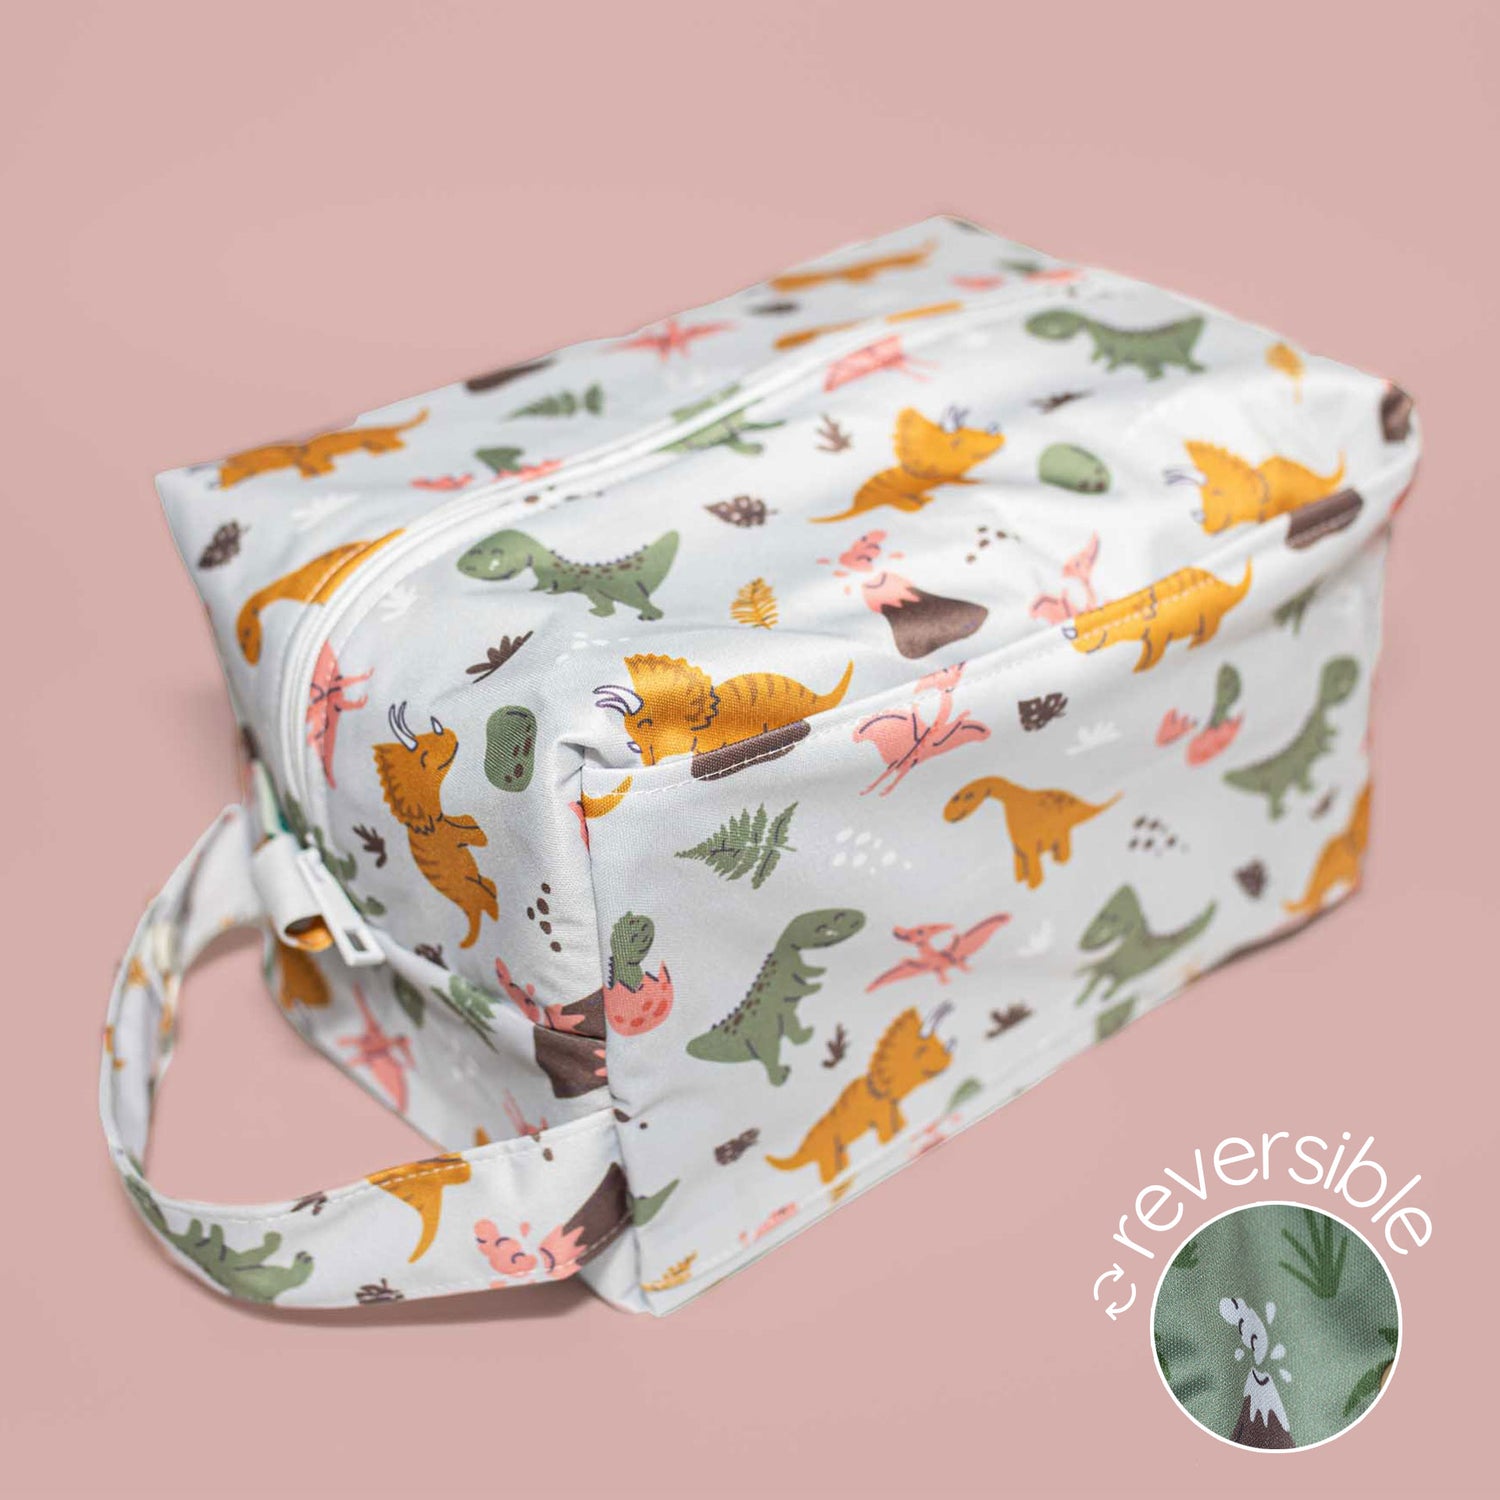 water resistant storage cube mini small storage pod zipper cube for travel pul cloth diaper pod travel bag dinosaur reversible playful kid mom dad travel on the go